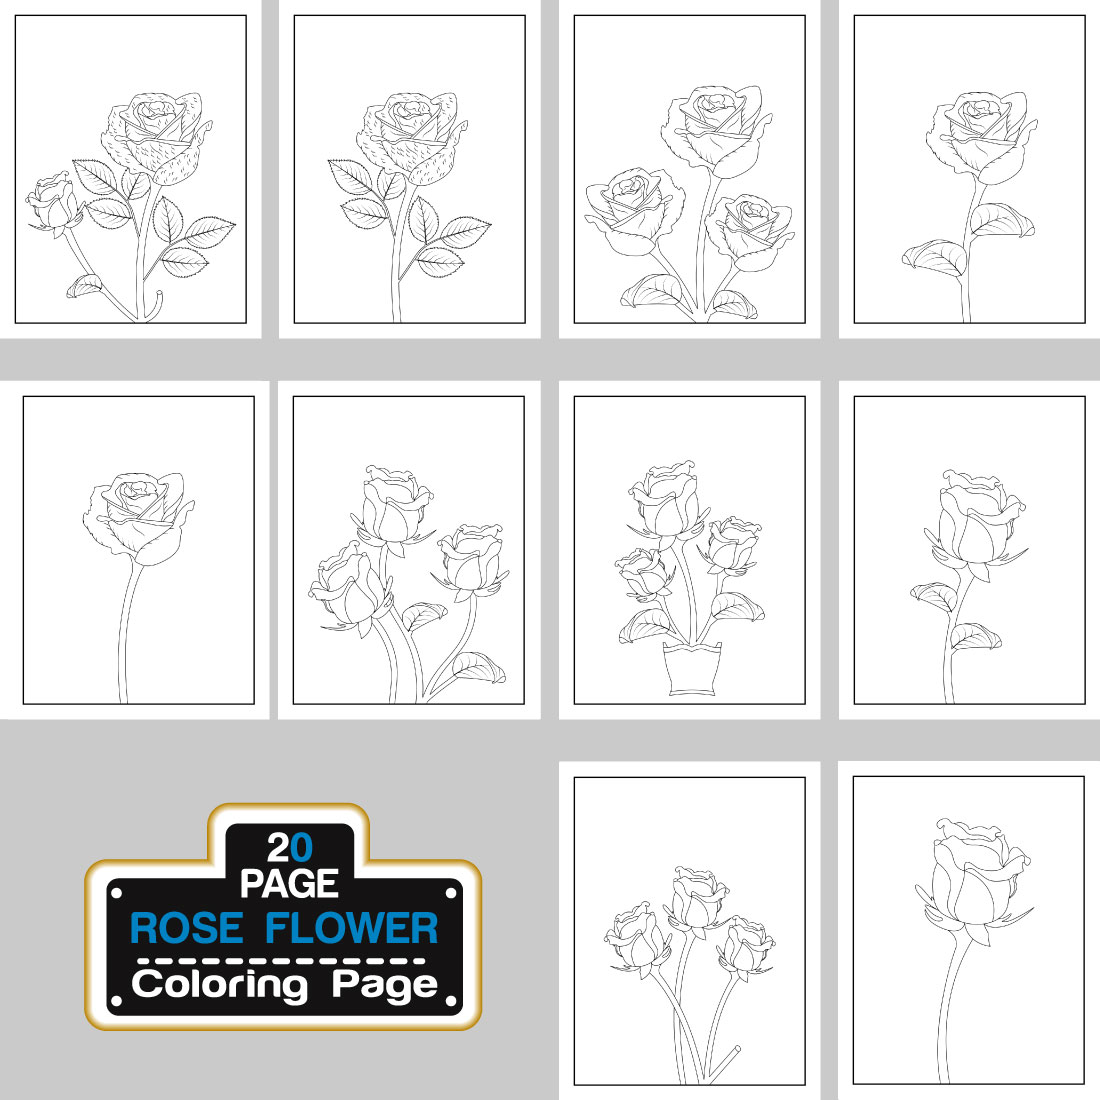 Rose Flower Coloring Page And Book Hand Drawn Line Art illustration cover image.